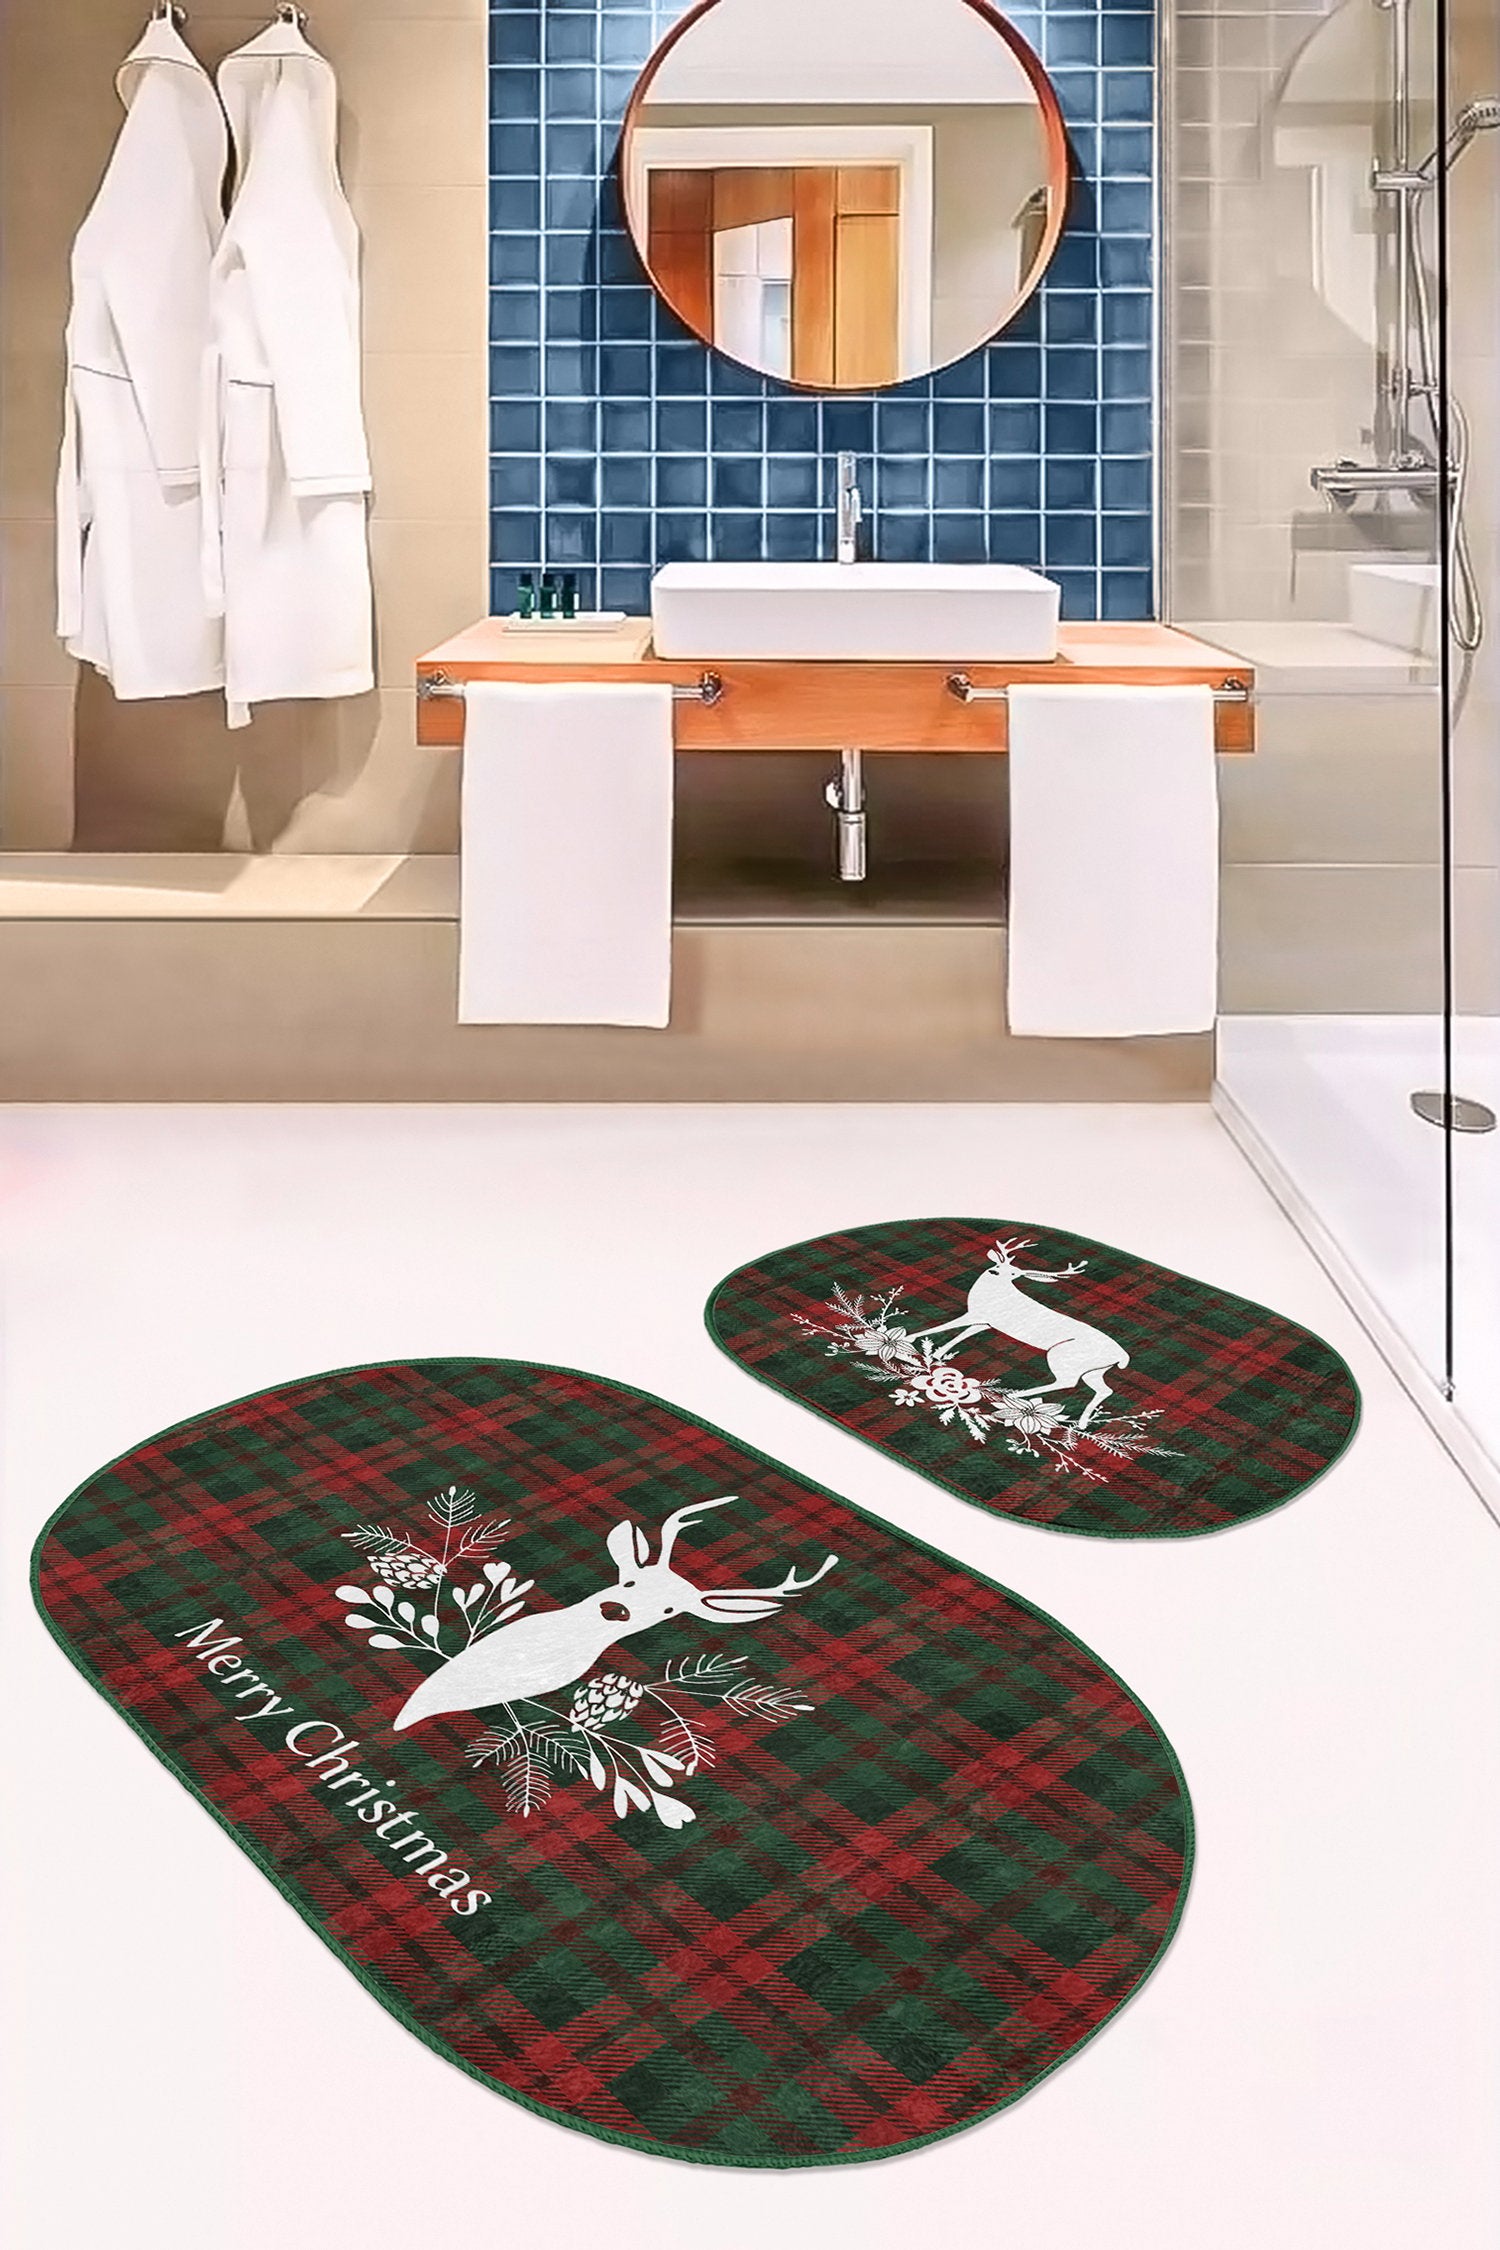 Merry and Bright Plaid Christmas Bathroom Accessories